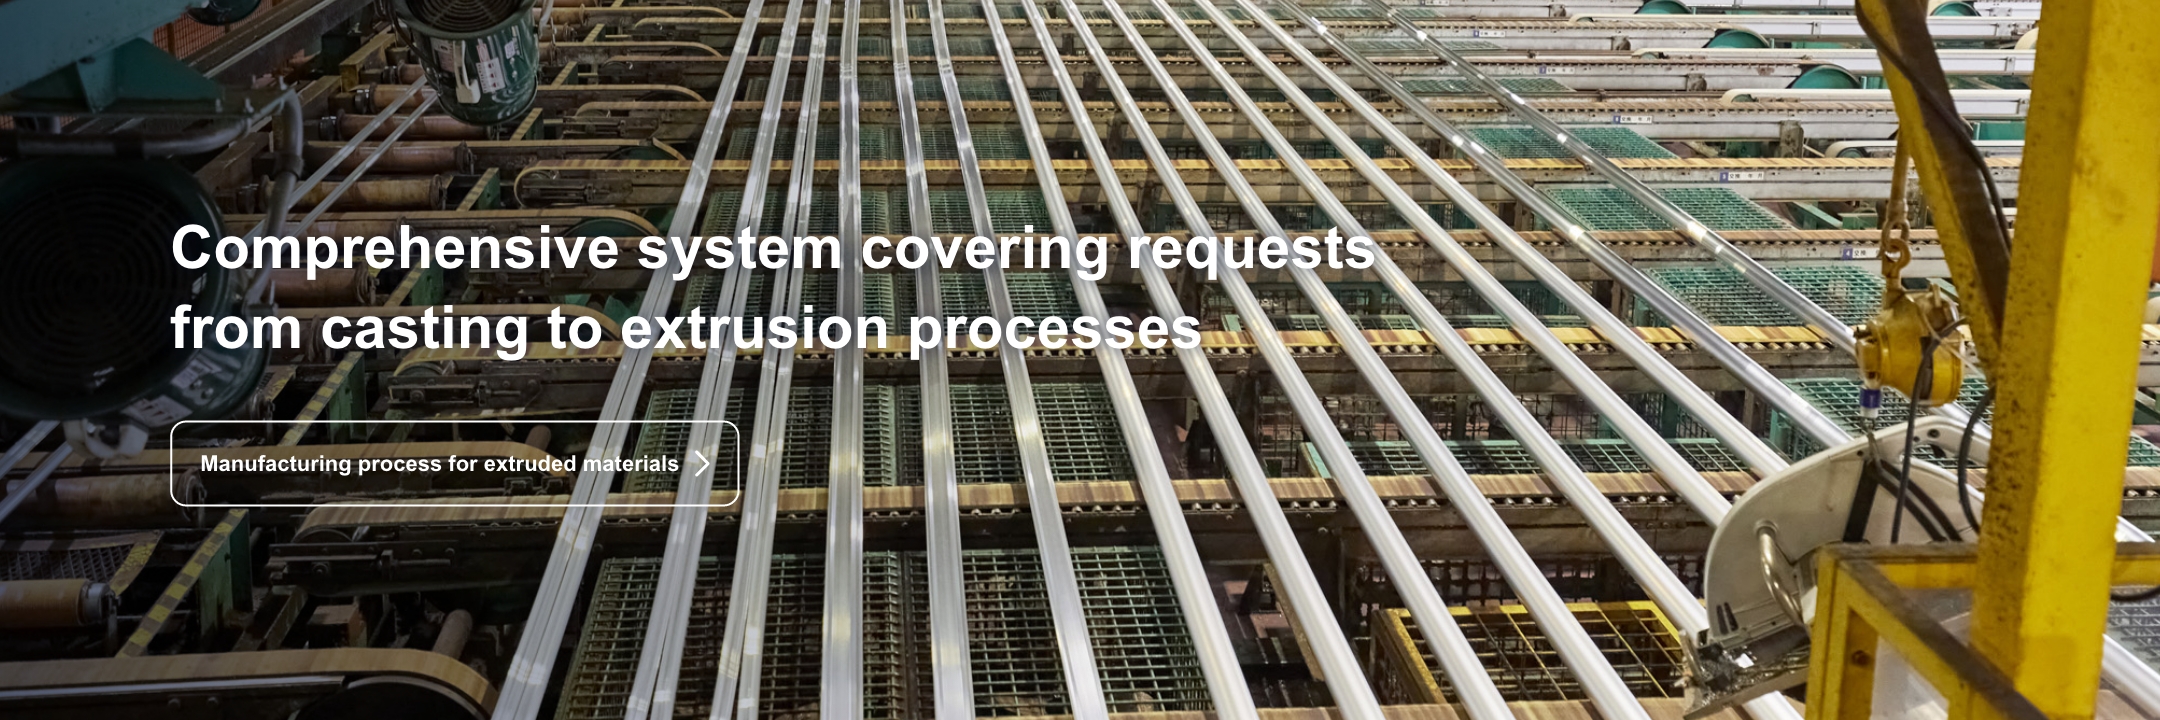 Comprehensive system covering requests from casting to extrusion processes